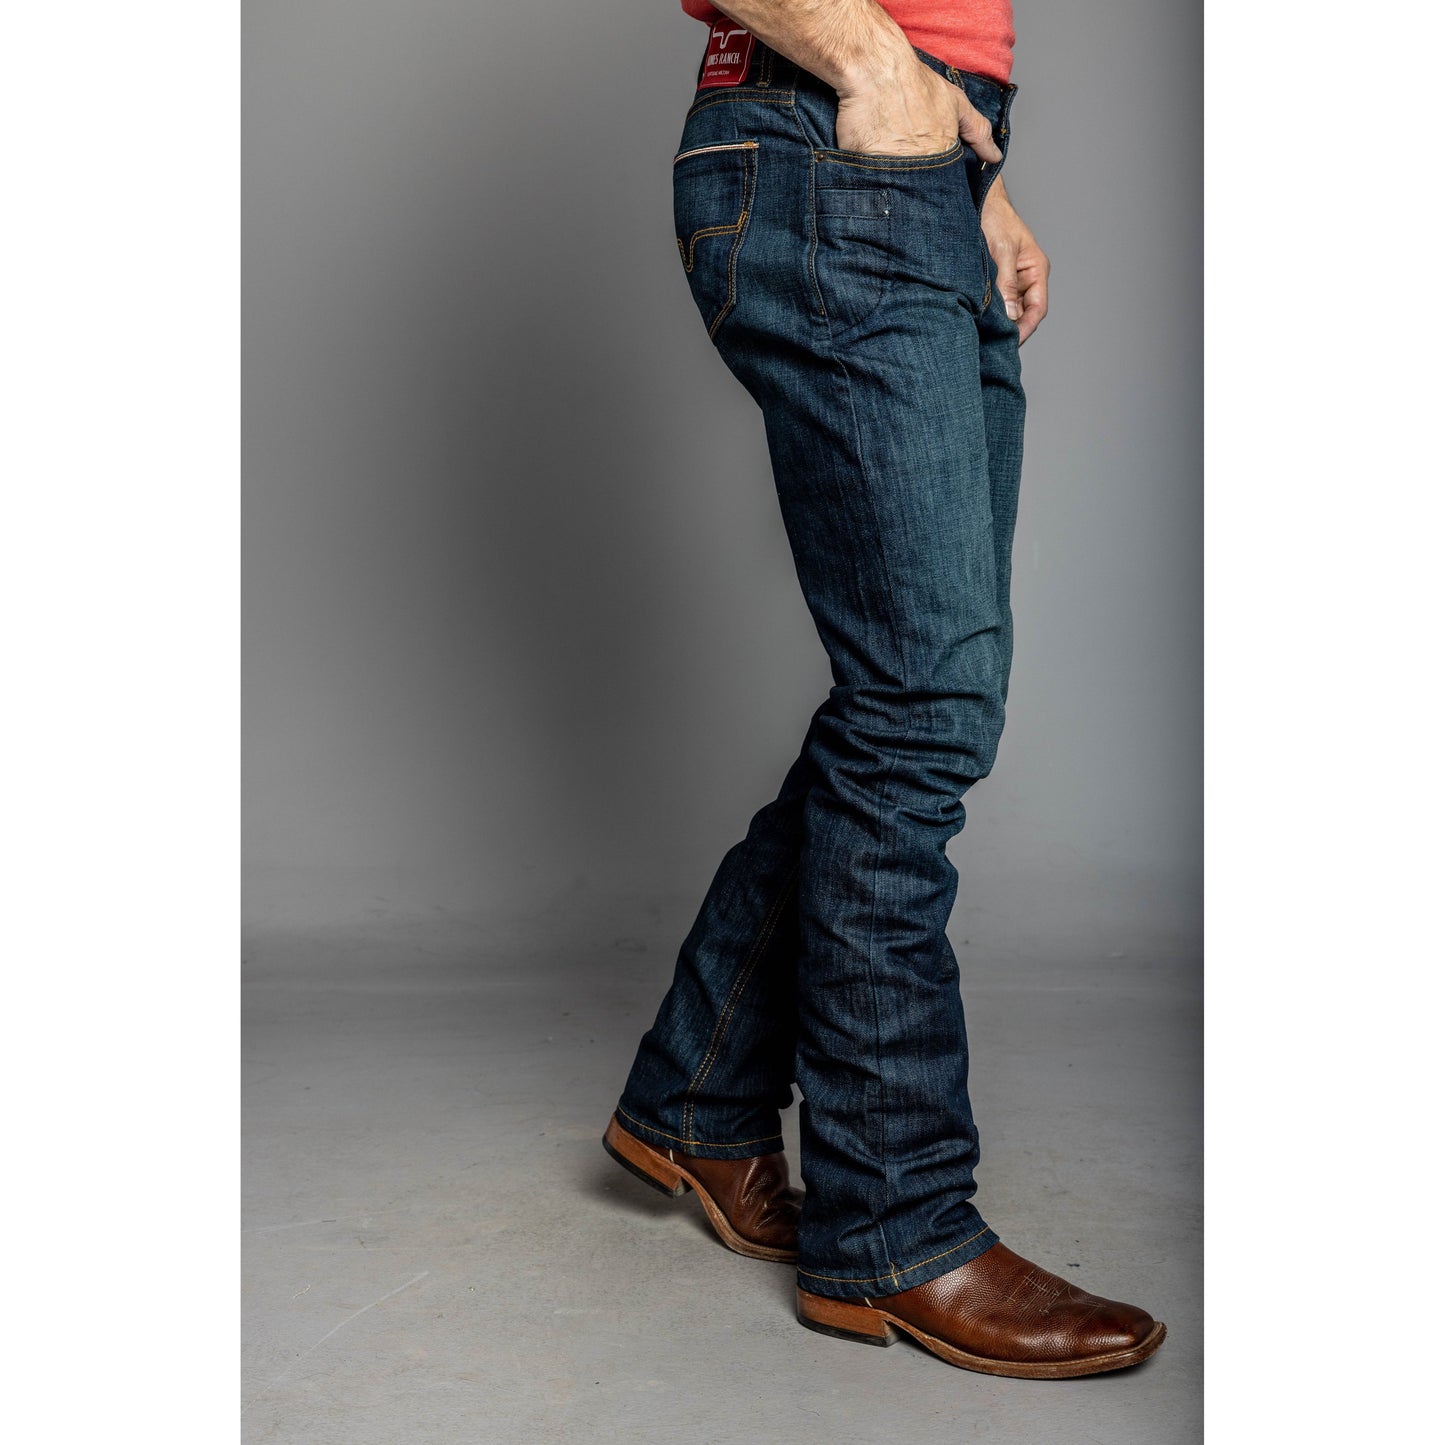 Kimes Ranch Mens Roger Jeans